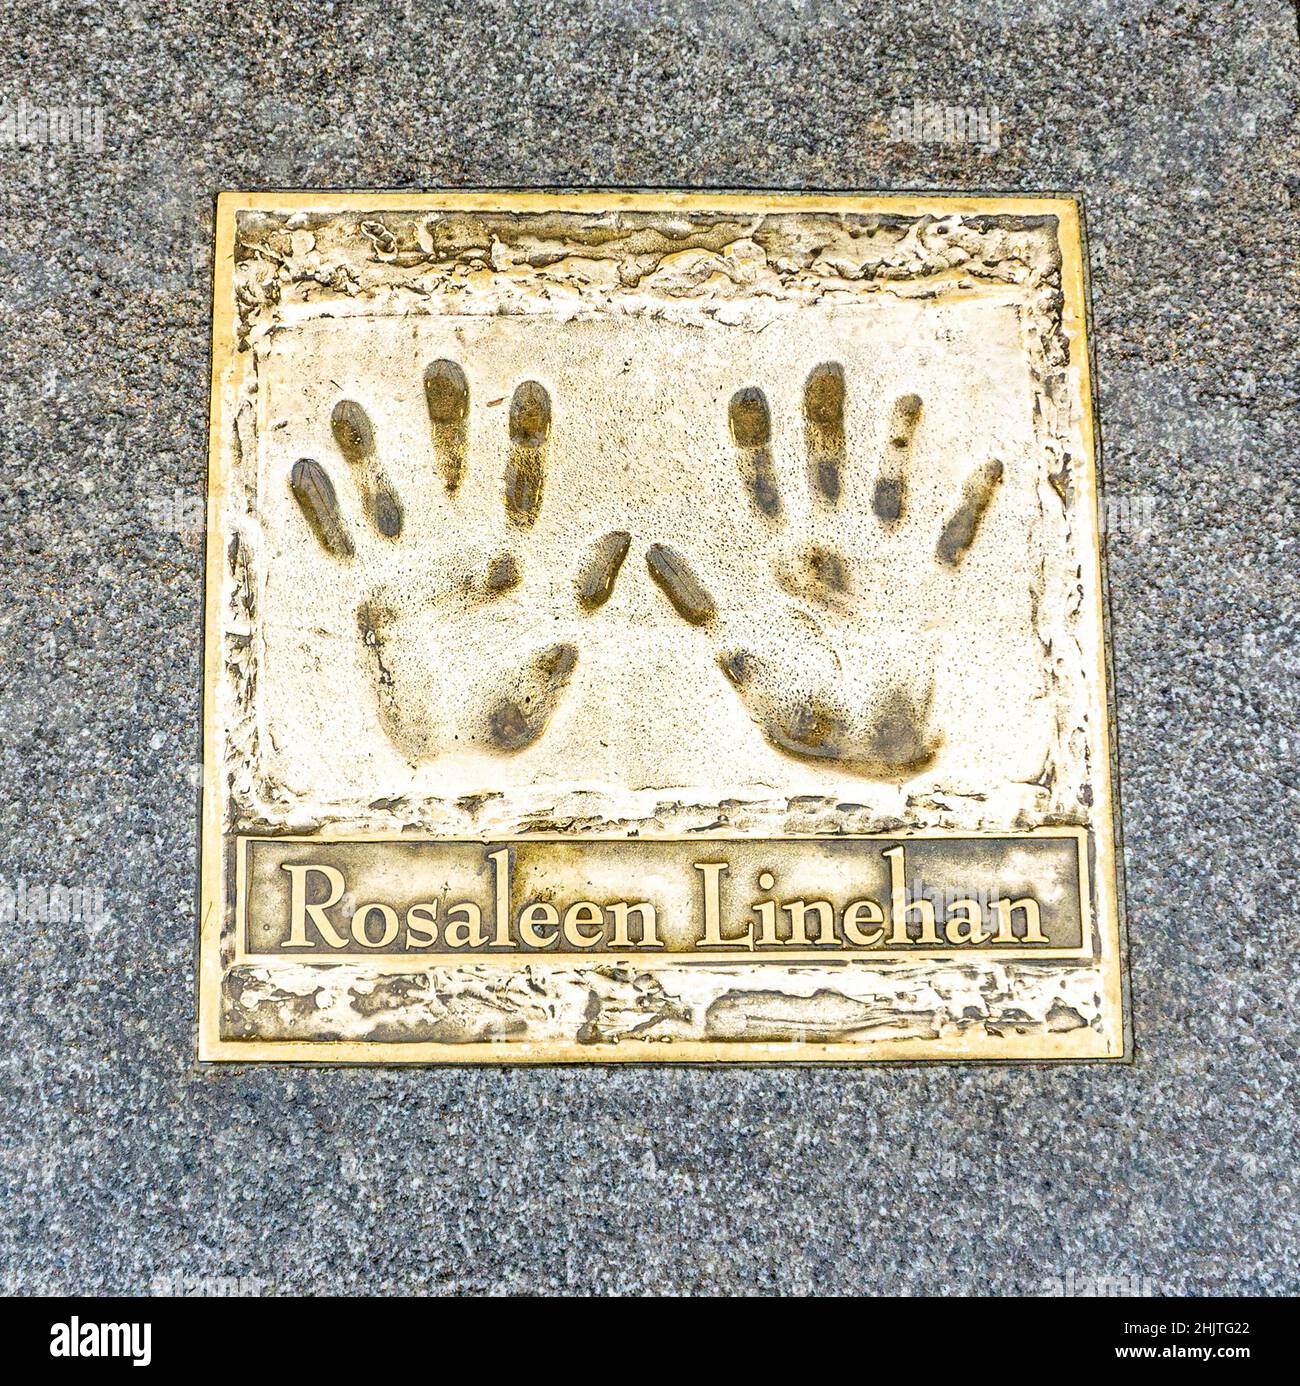 The handprints of Rosaleen Lineman,  the Irish actress, on the pavement outside the Gaiety Theatre in Dublin, Ireland. Stock Photo